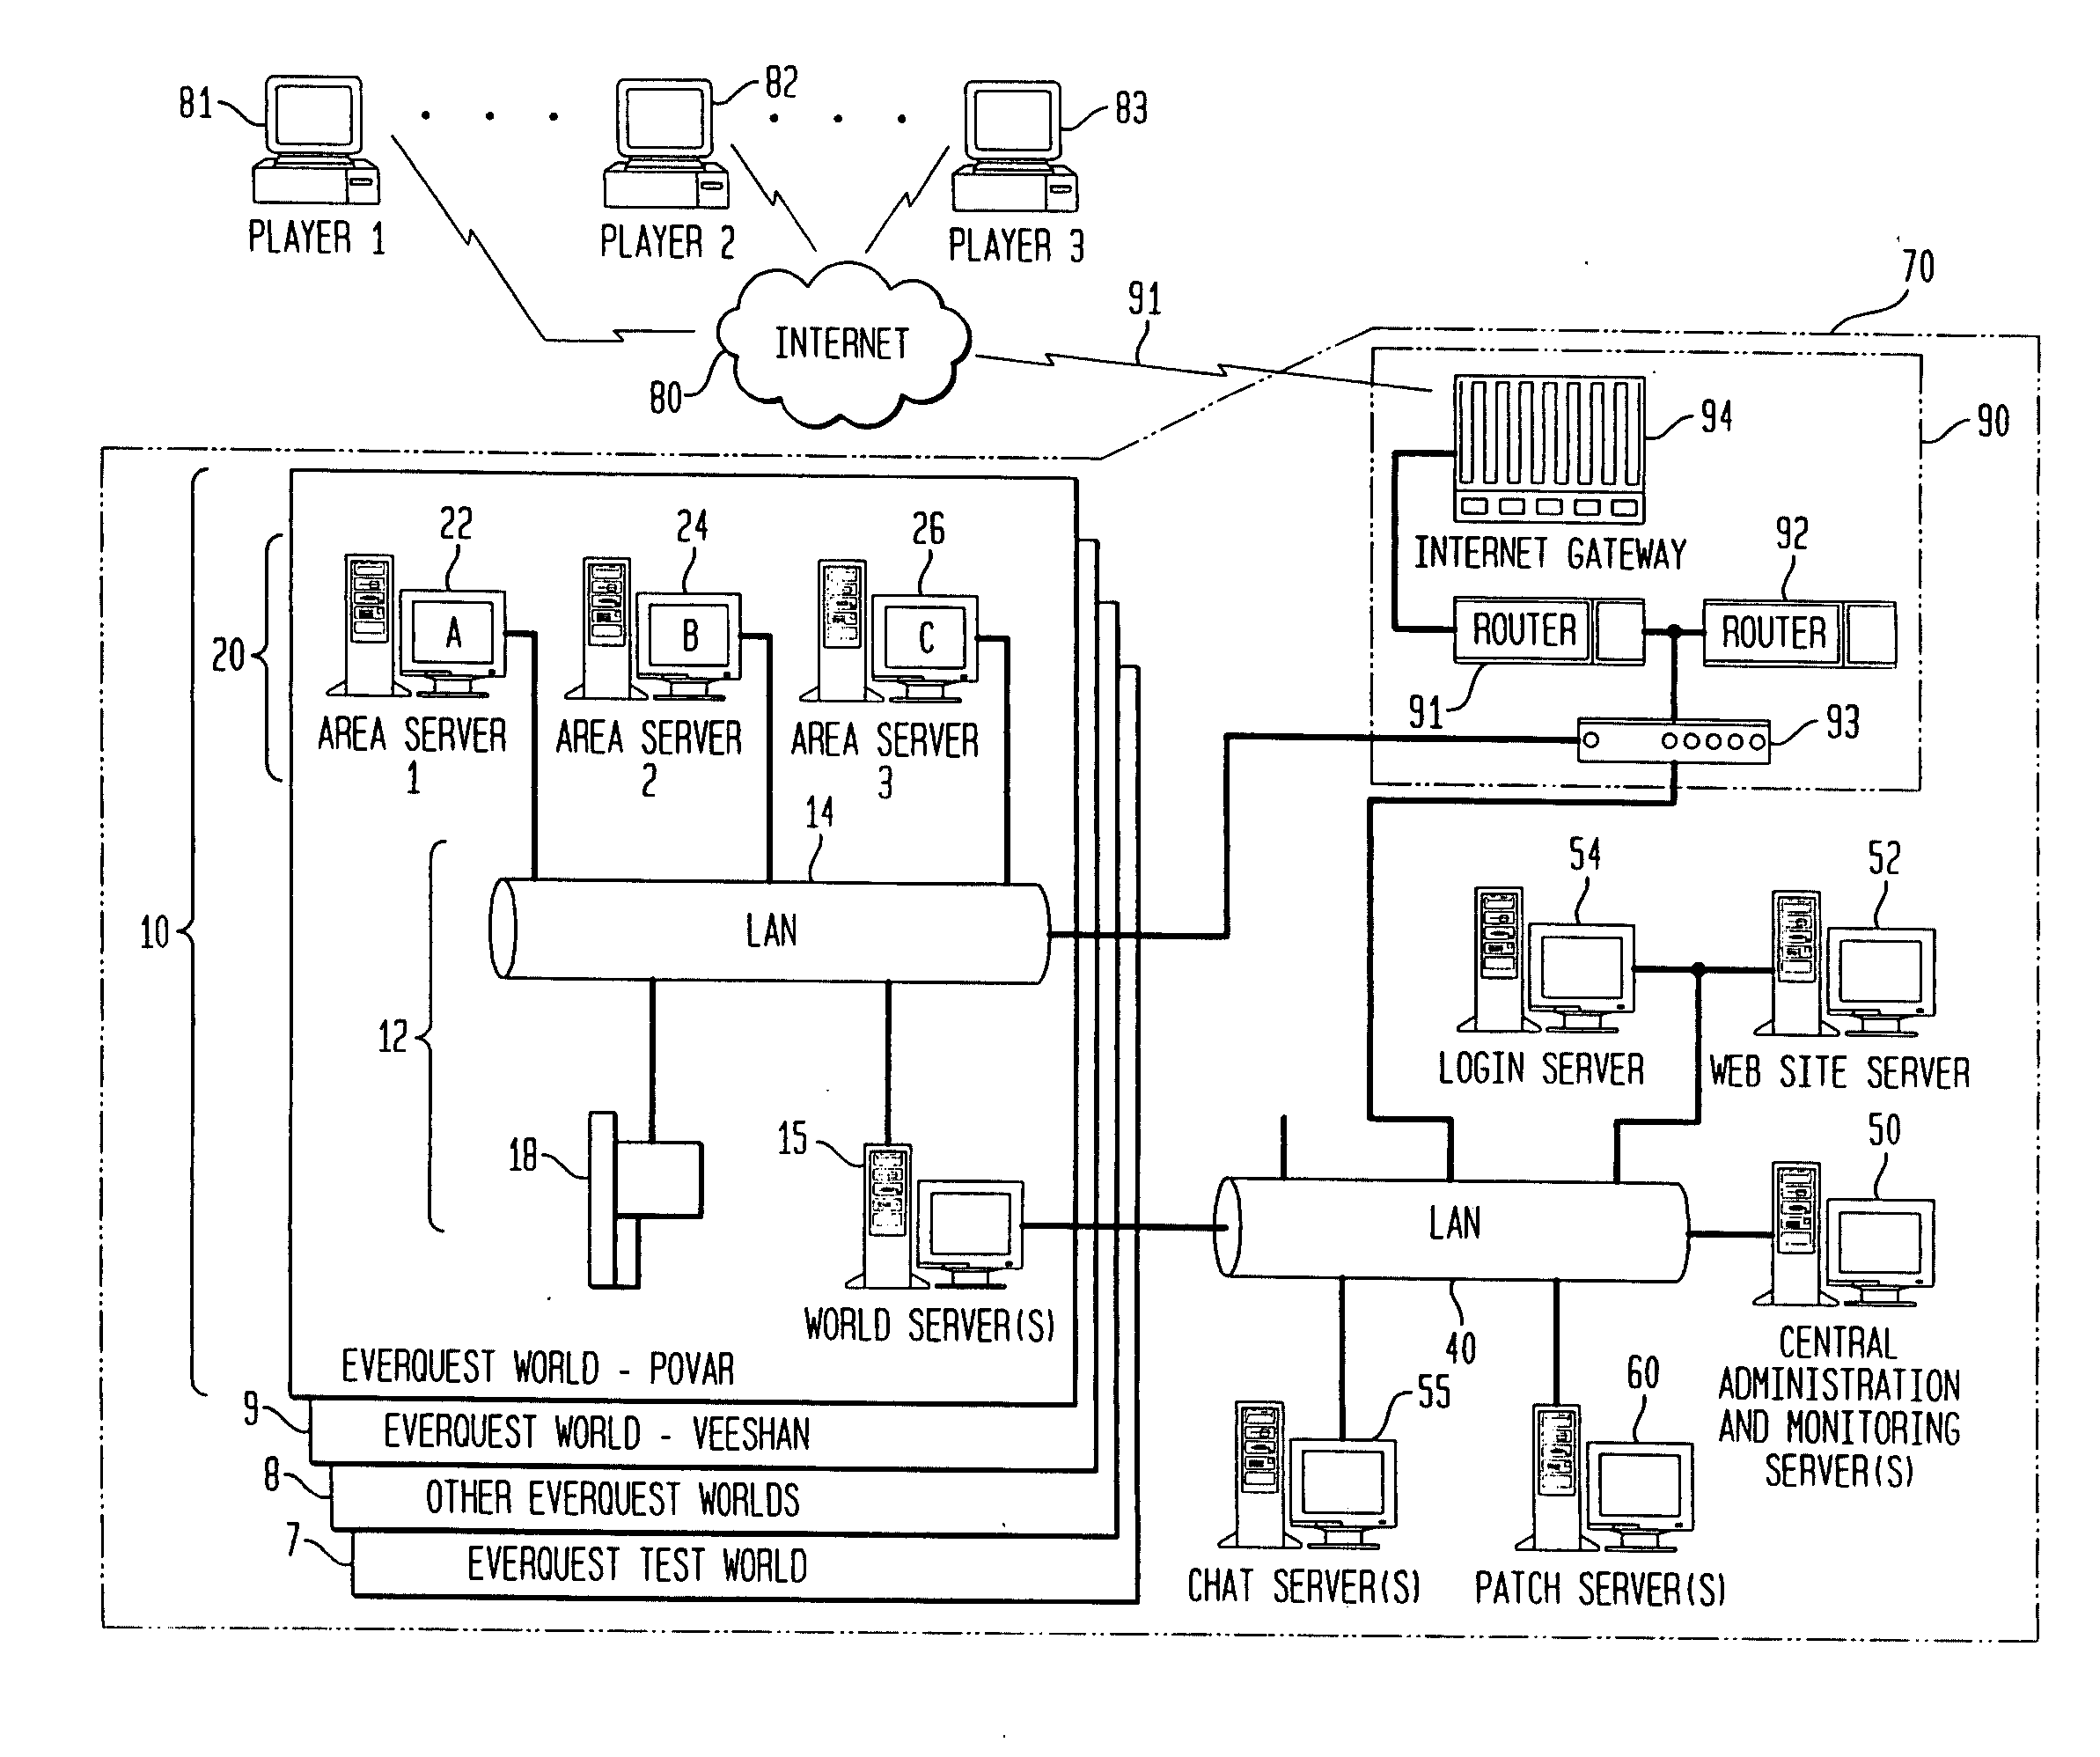 Data transmission protocol and visual display for a networked computer system